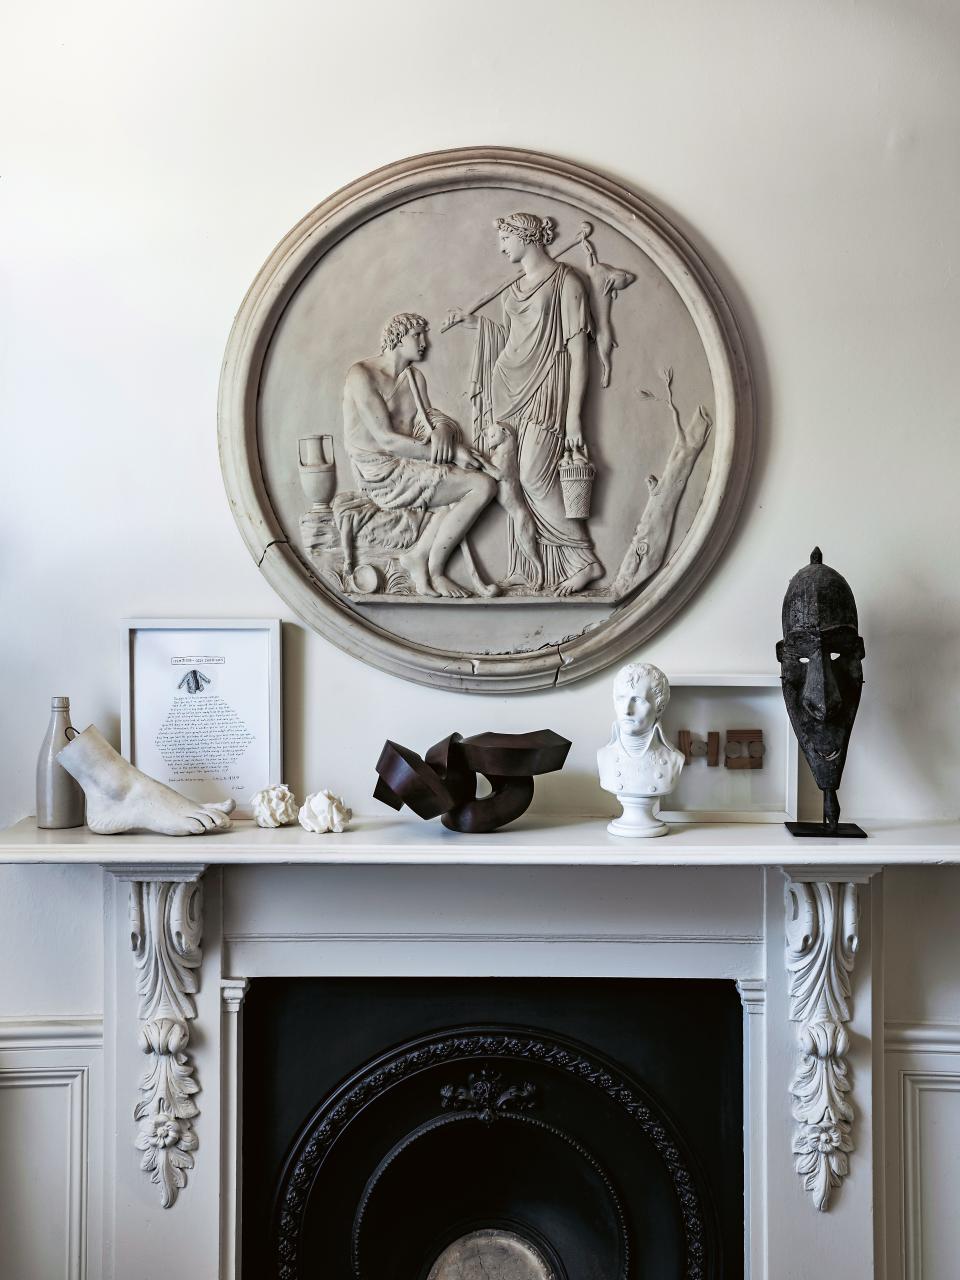 “Living in a Victorian terrace means that space and scale are limited,” says Ronan Sulich, a veteran of the auction house Christie’s of his Sydney home. “While I still love the art and culture of the 18th century, I’m also drawn to the contemporary art of our time, and increasingly add small modern pieces into the mix, where they speak to each other across the ages.” Here, an abstract Clement Meadmore sculpture plays off more classical figurative works.